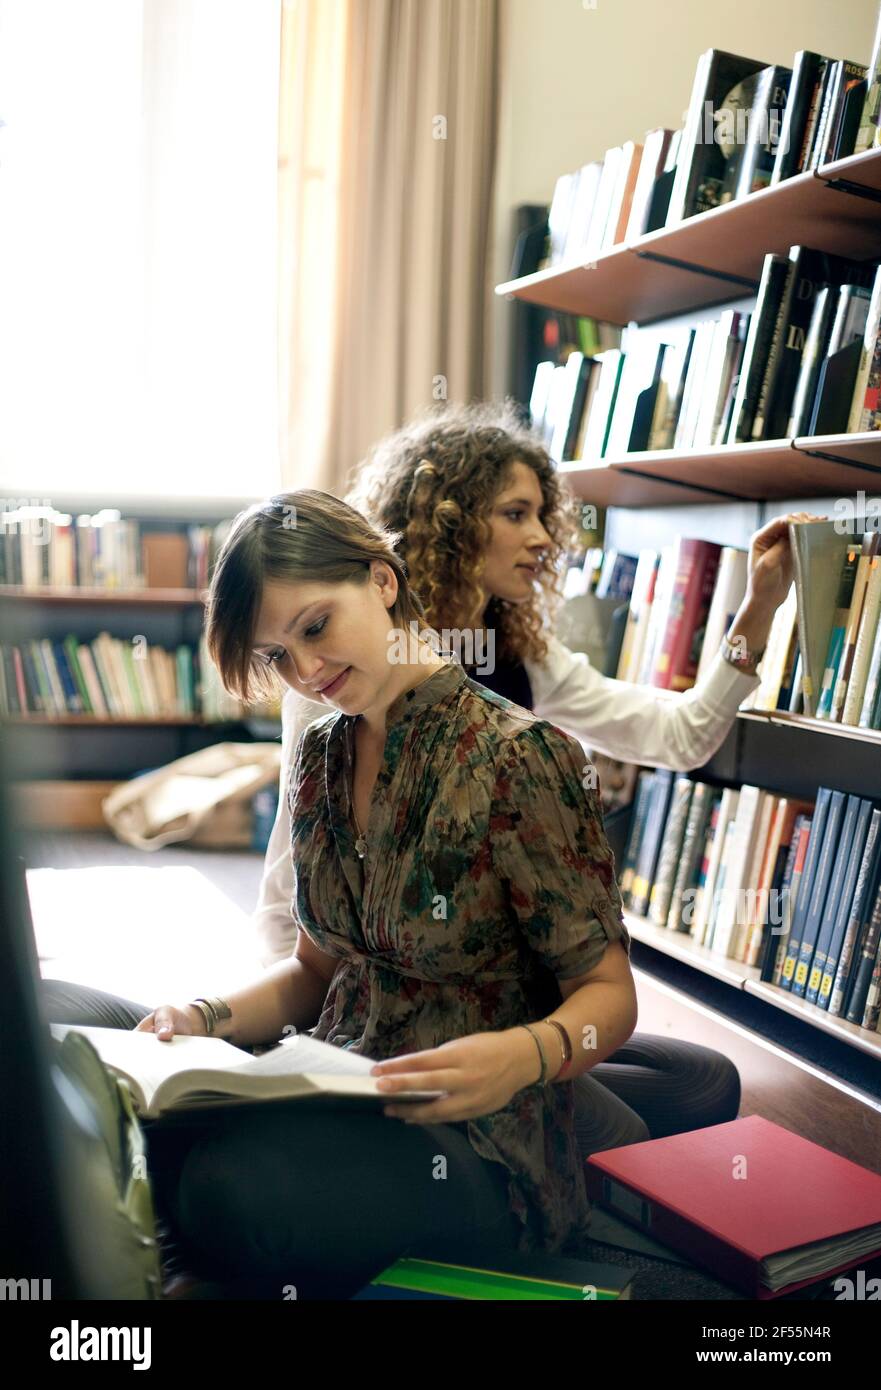 Female students reading books while sitting in library Stock Photo